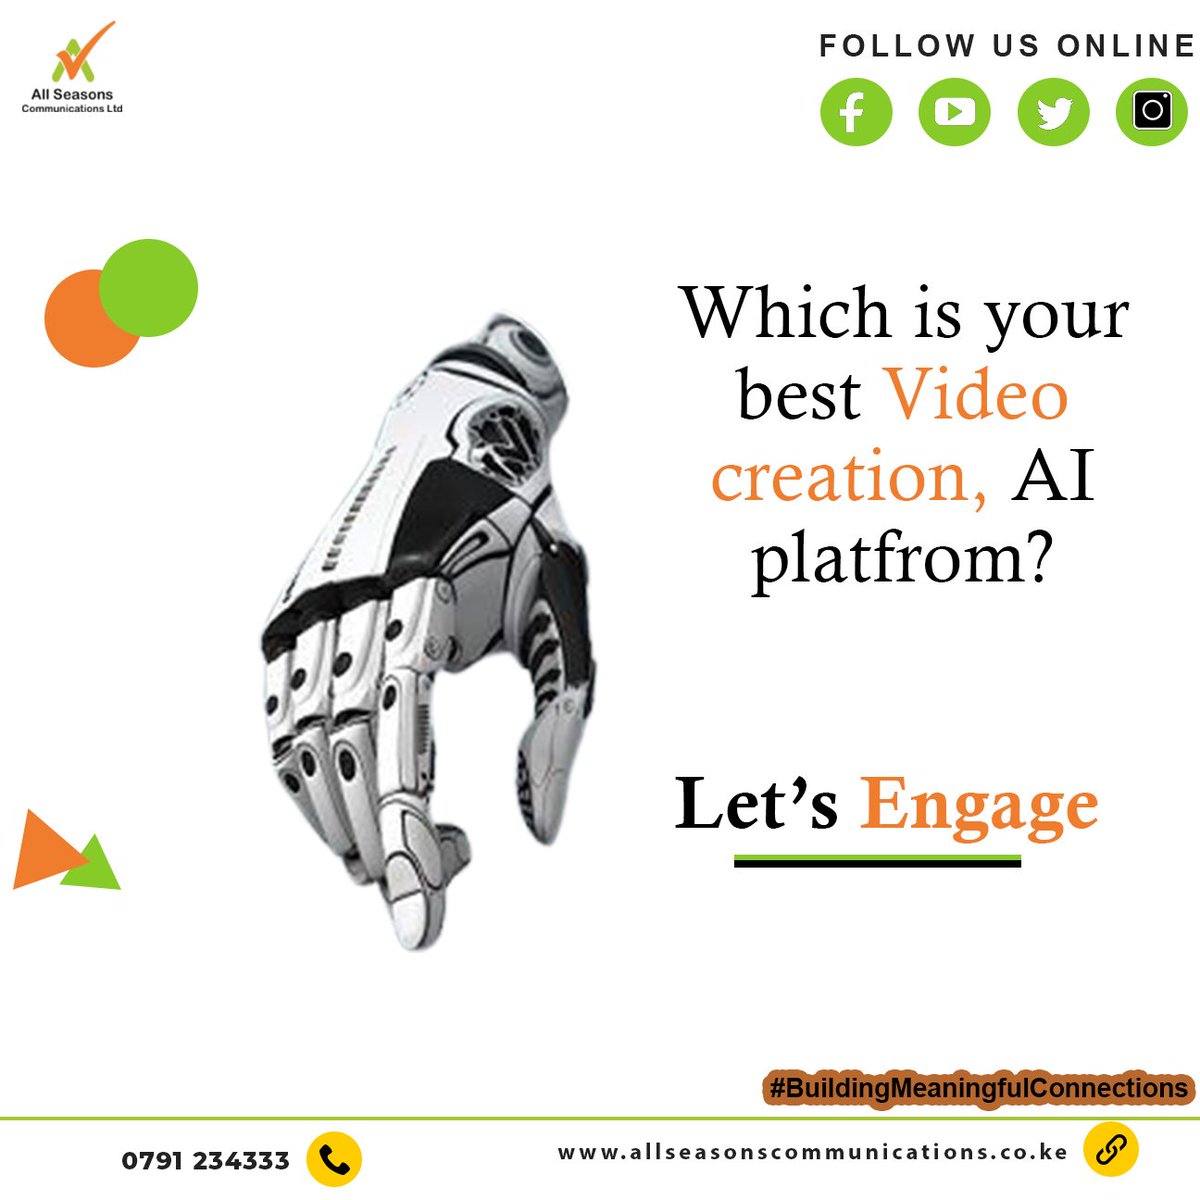 5 top video creation AI platforms:

Adobe Premiere Pro: Professional editing with AI features.
Magisto: Automates video editing process with AI.
Lumen5: Turns text into engaging videos using AI.
Animoto: Easy video creation with AI automation.
InVideo: Intuitive editing tools